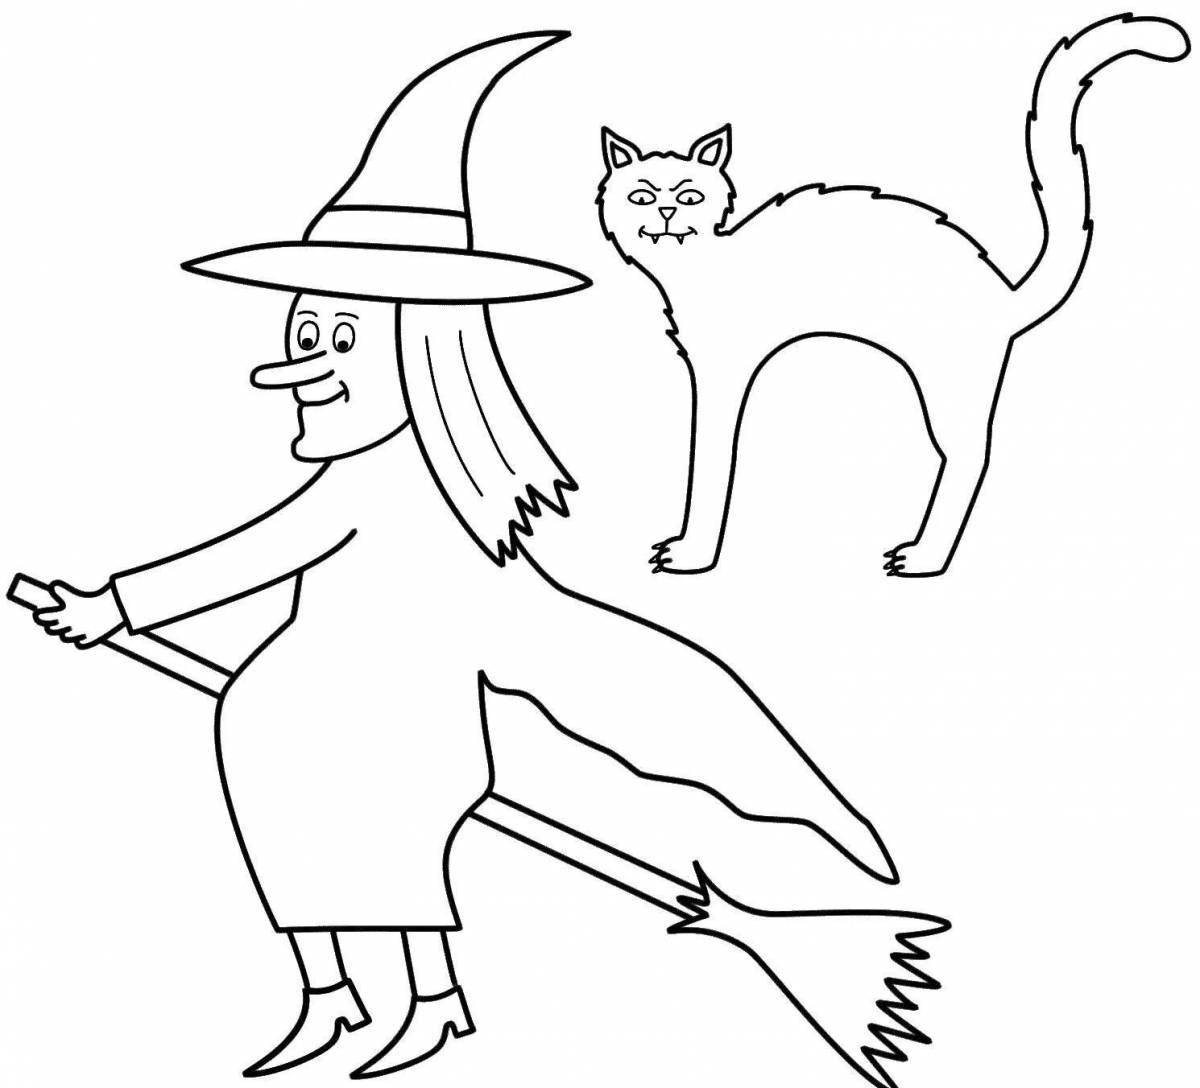 Wicked witch coloring book